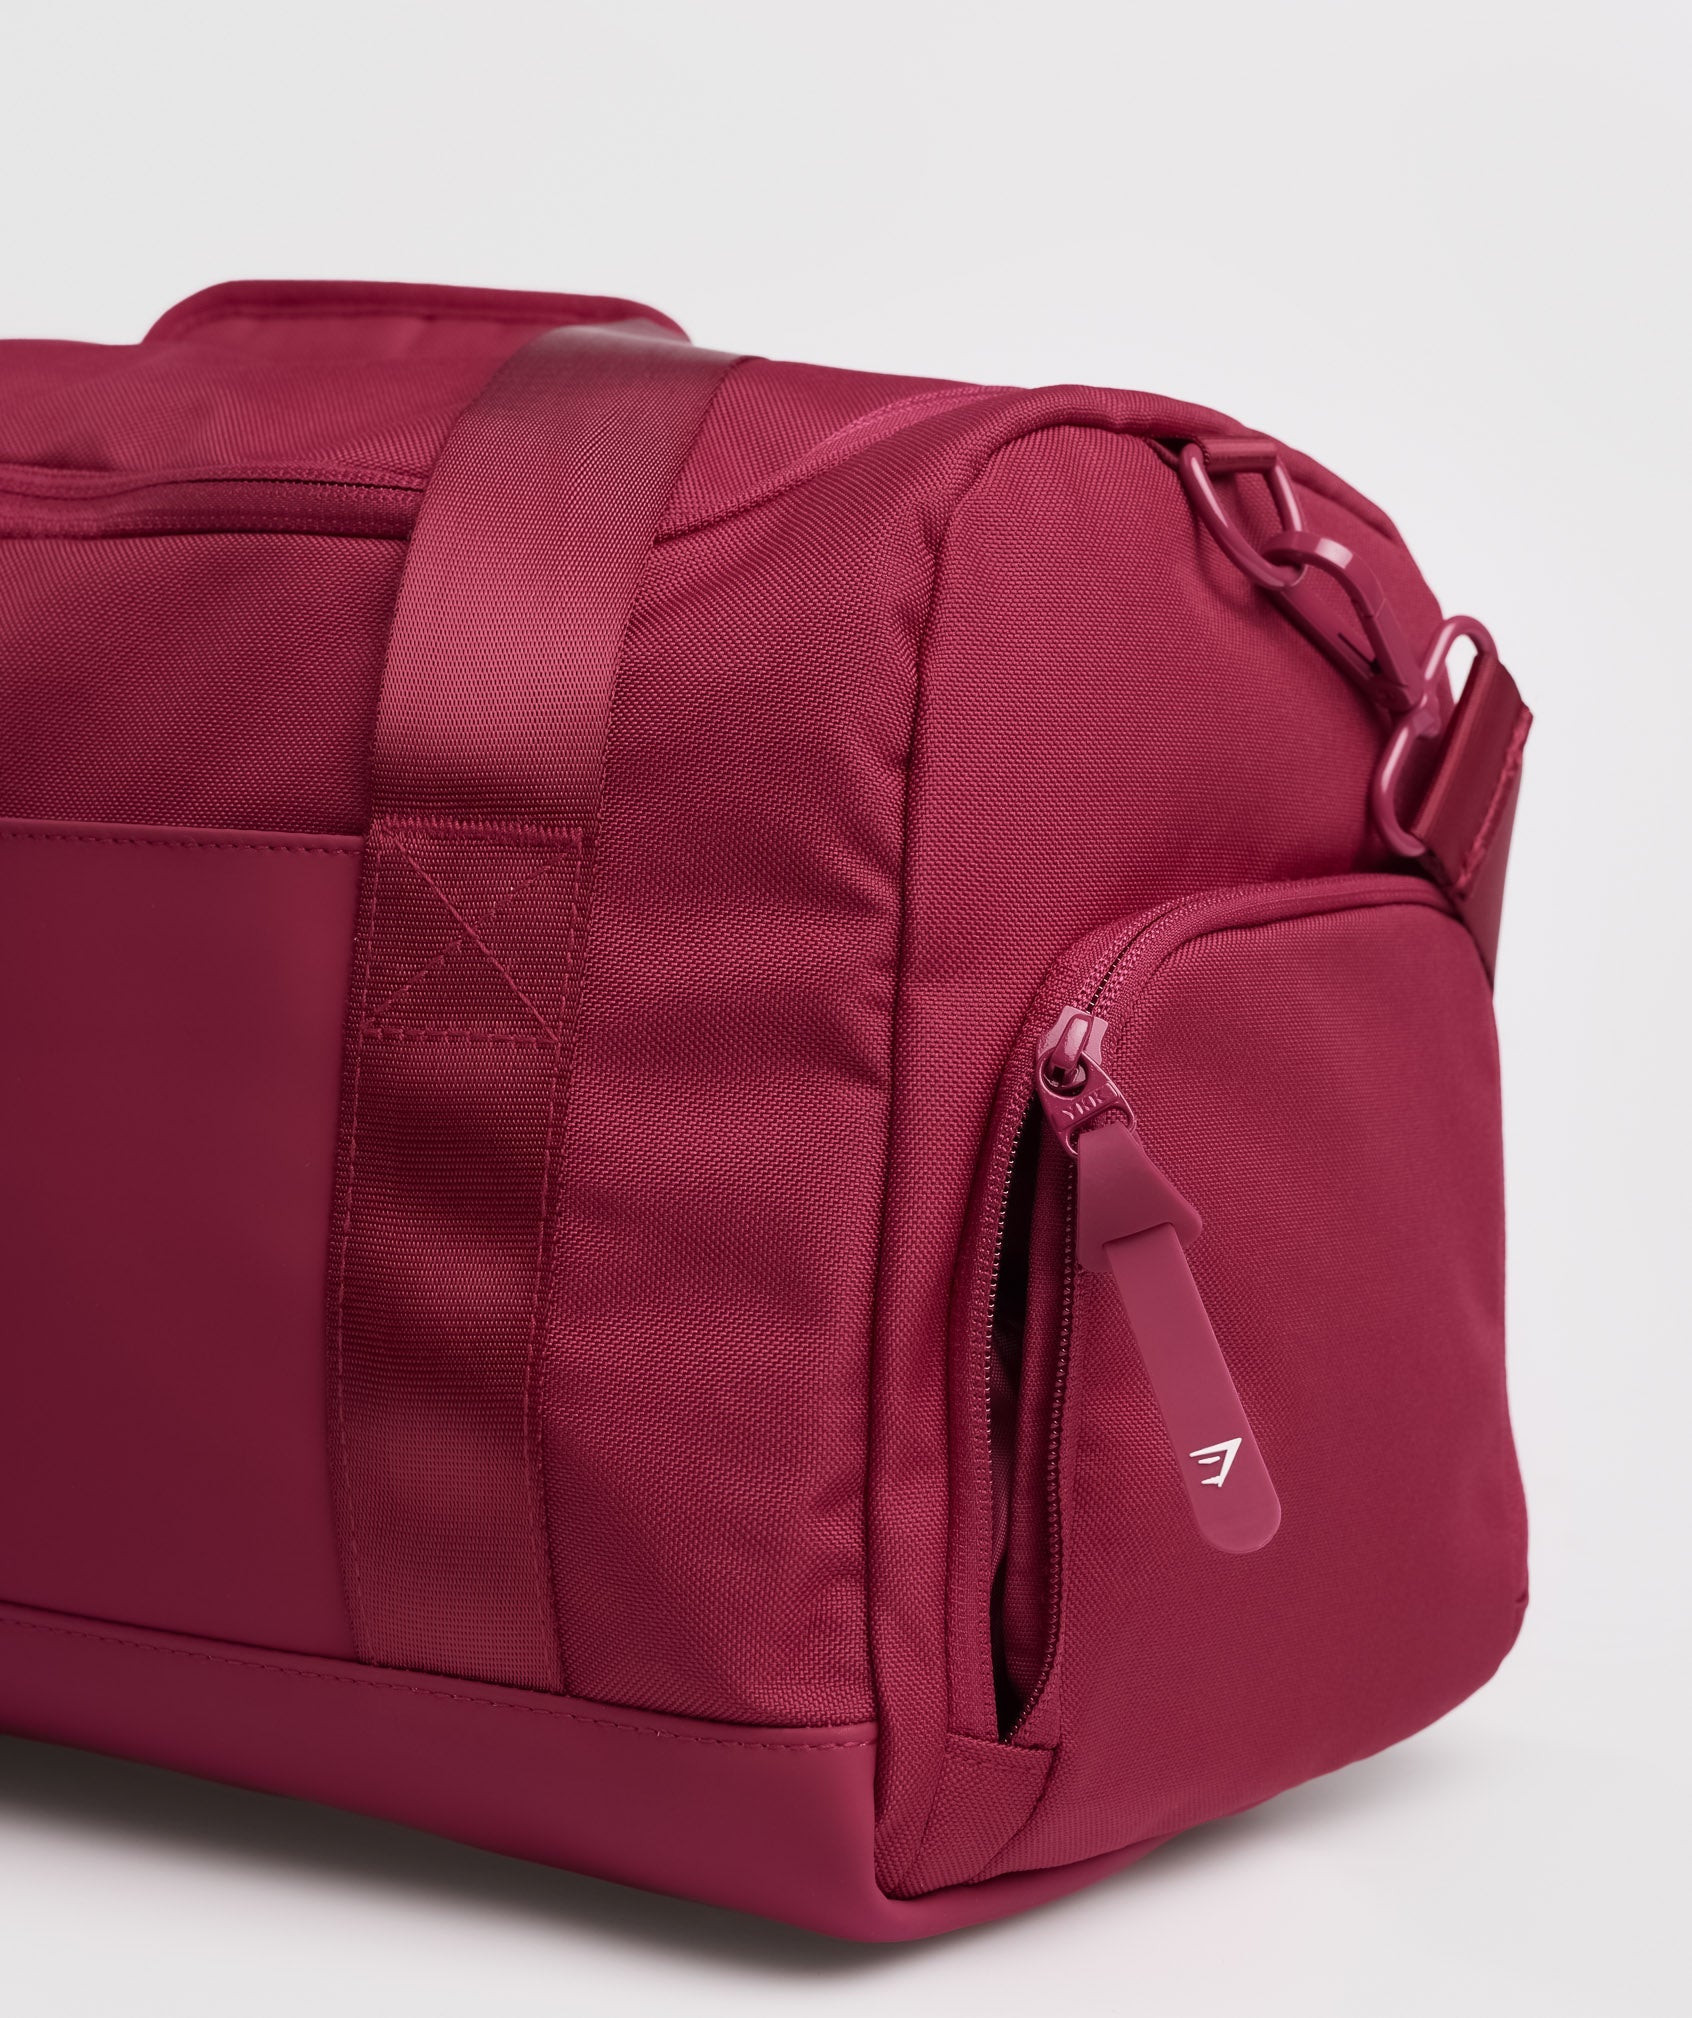 Everyday Gym Bag Small in Raspberry Pink - view 4